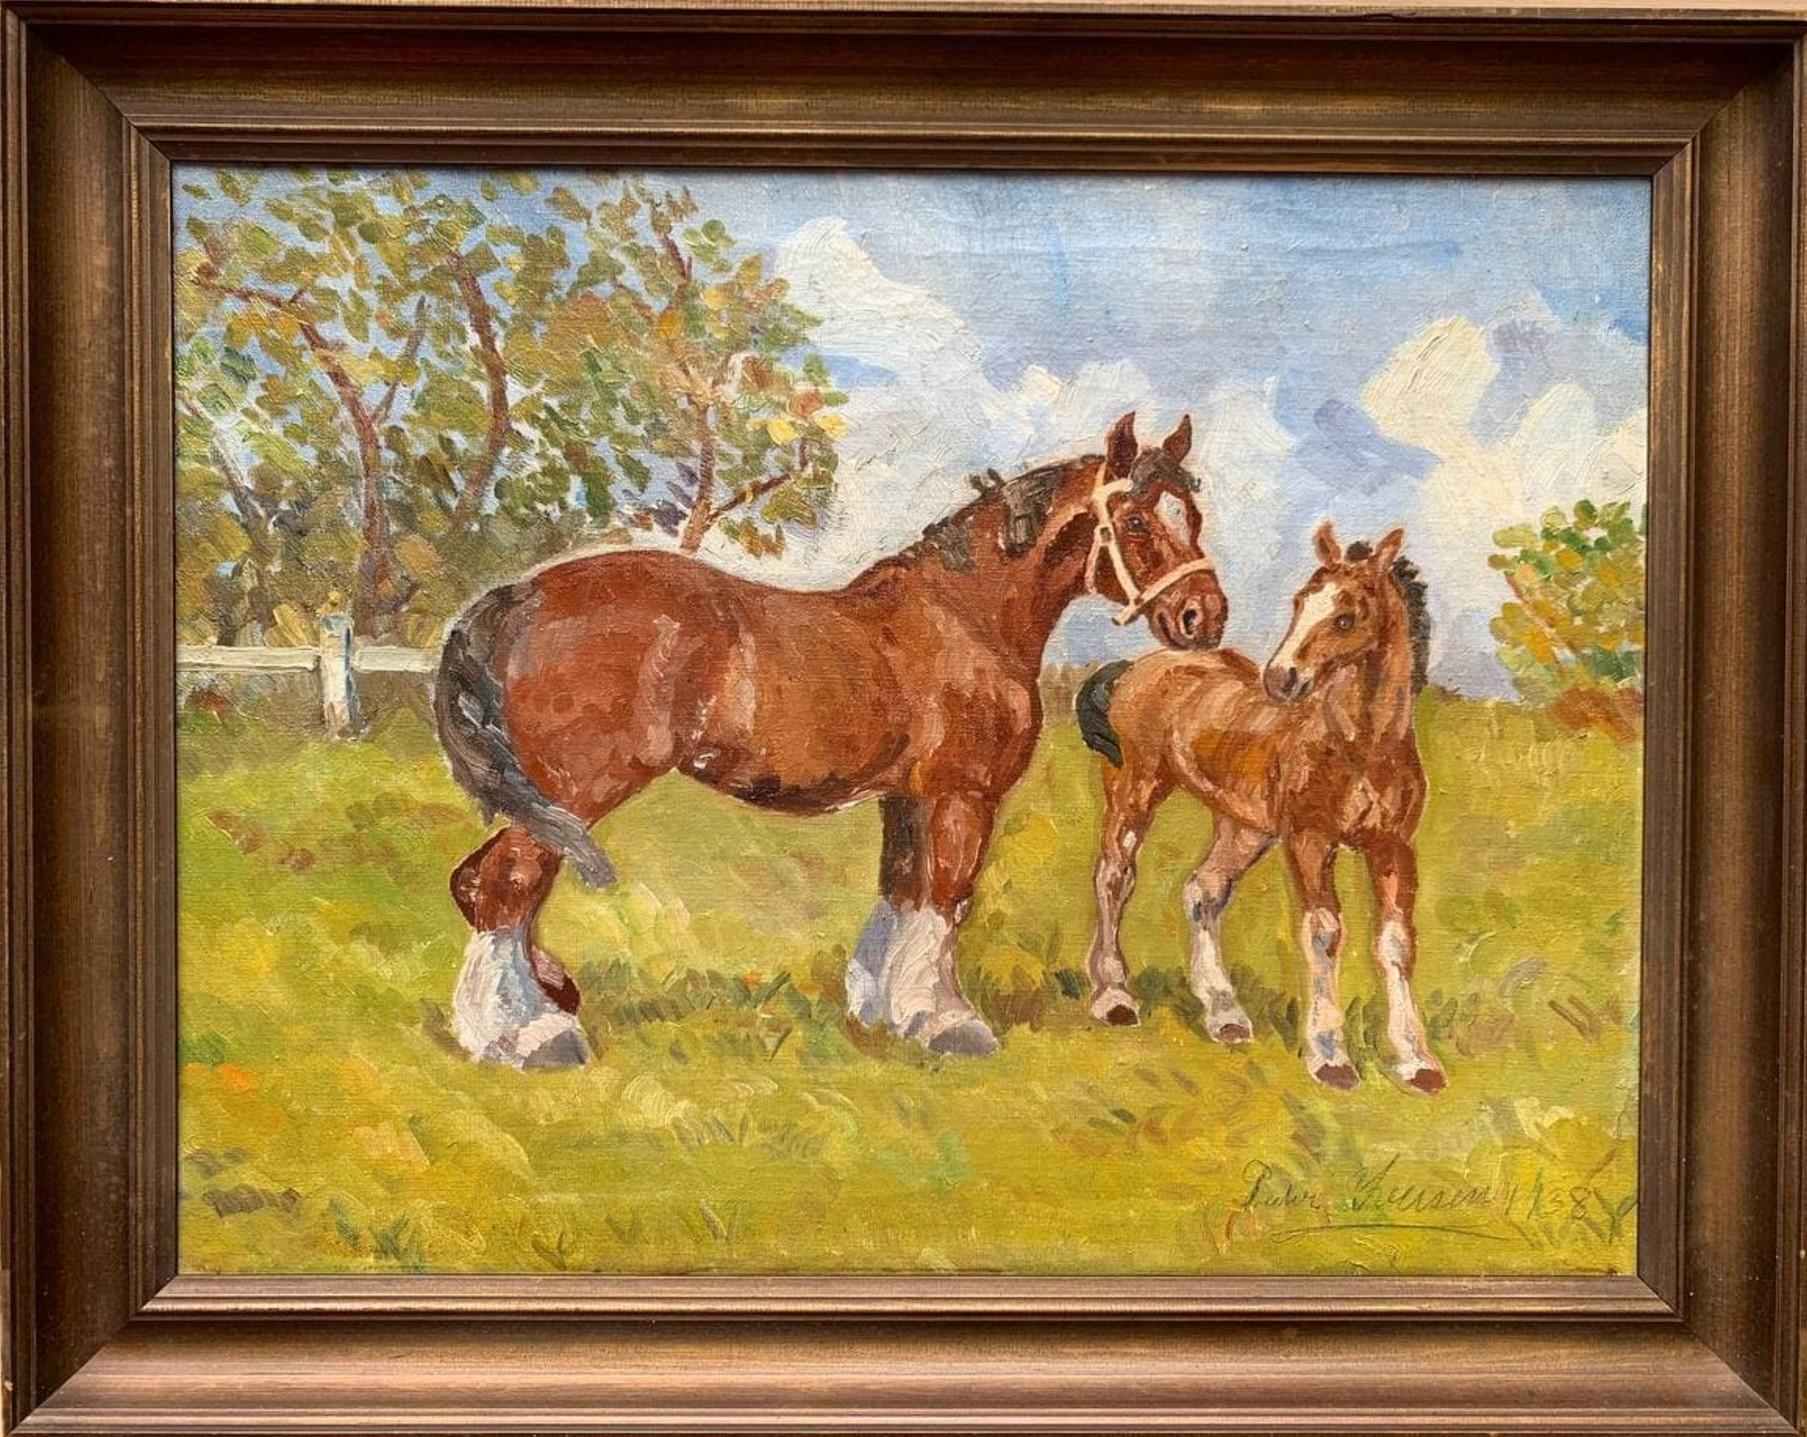 Unknown Landscape Painting - 1938 Danish Vintage/antique oil painting on canvas, Horses, Signed dated